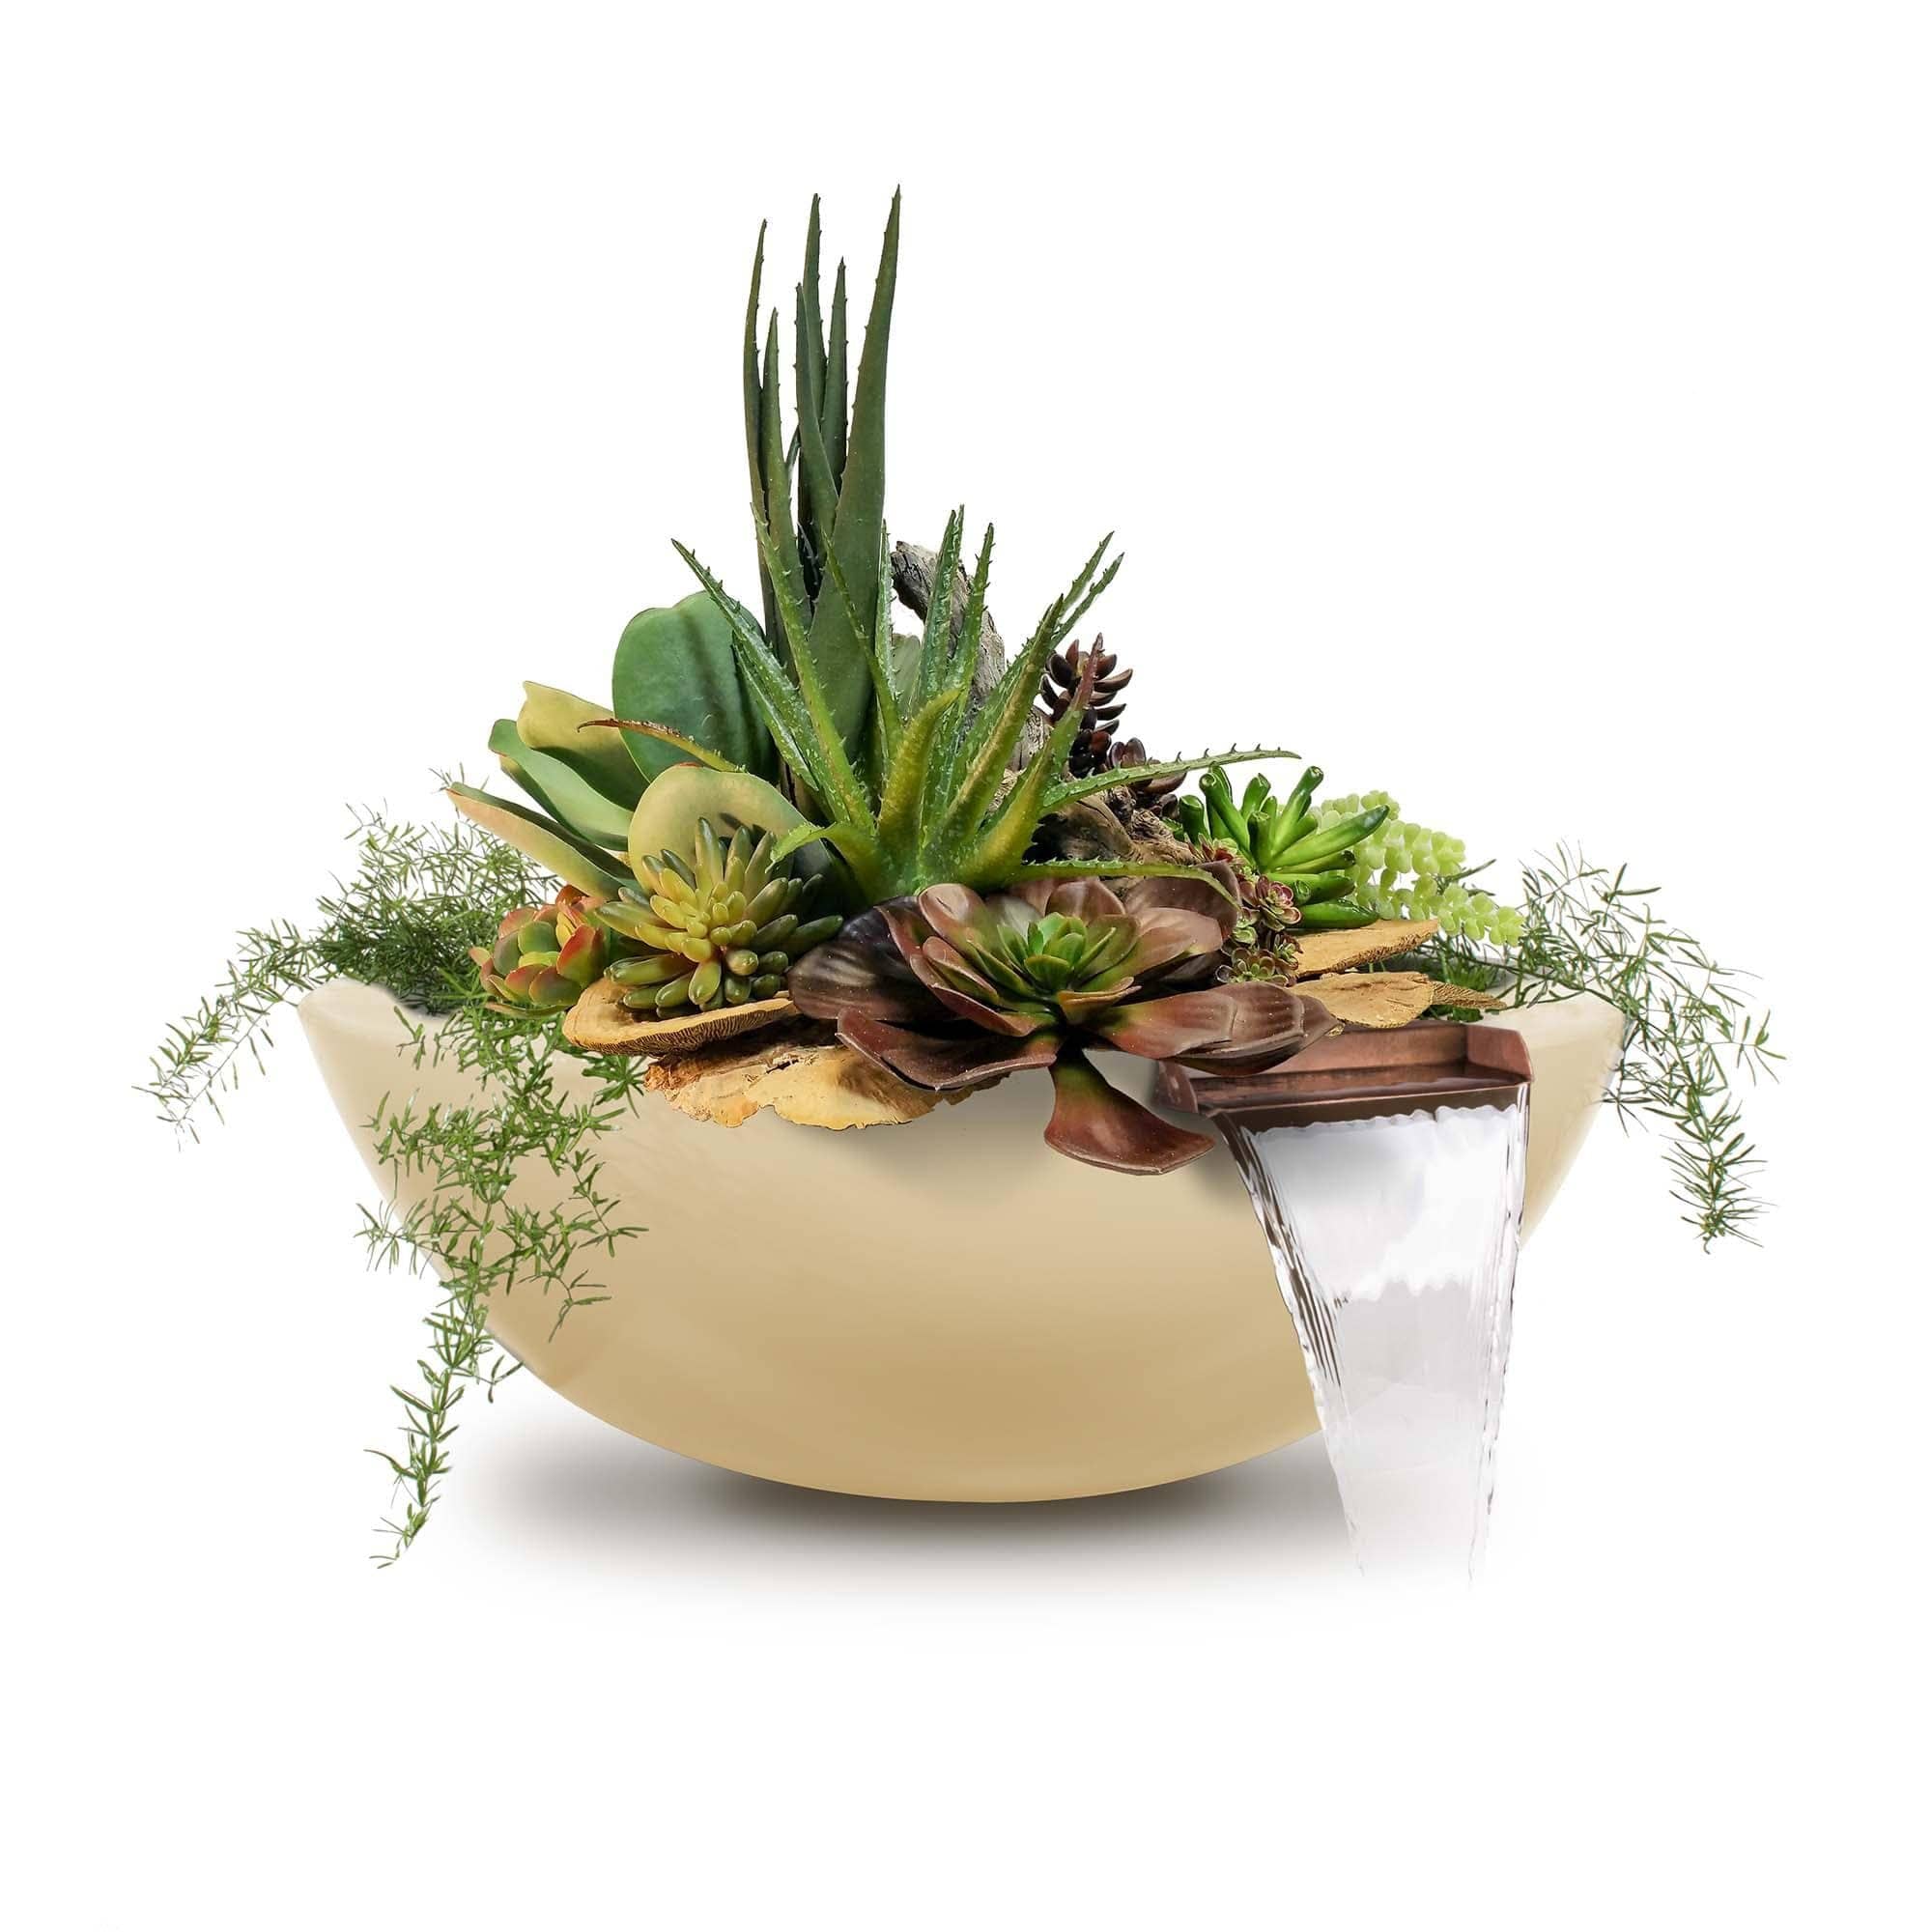 The Outdoor Plus Sedona Planter and Water Bowl - Concrete